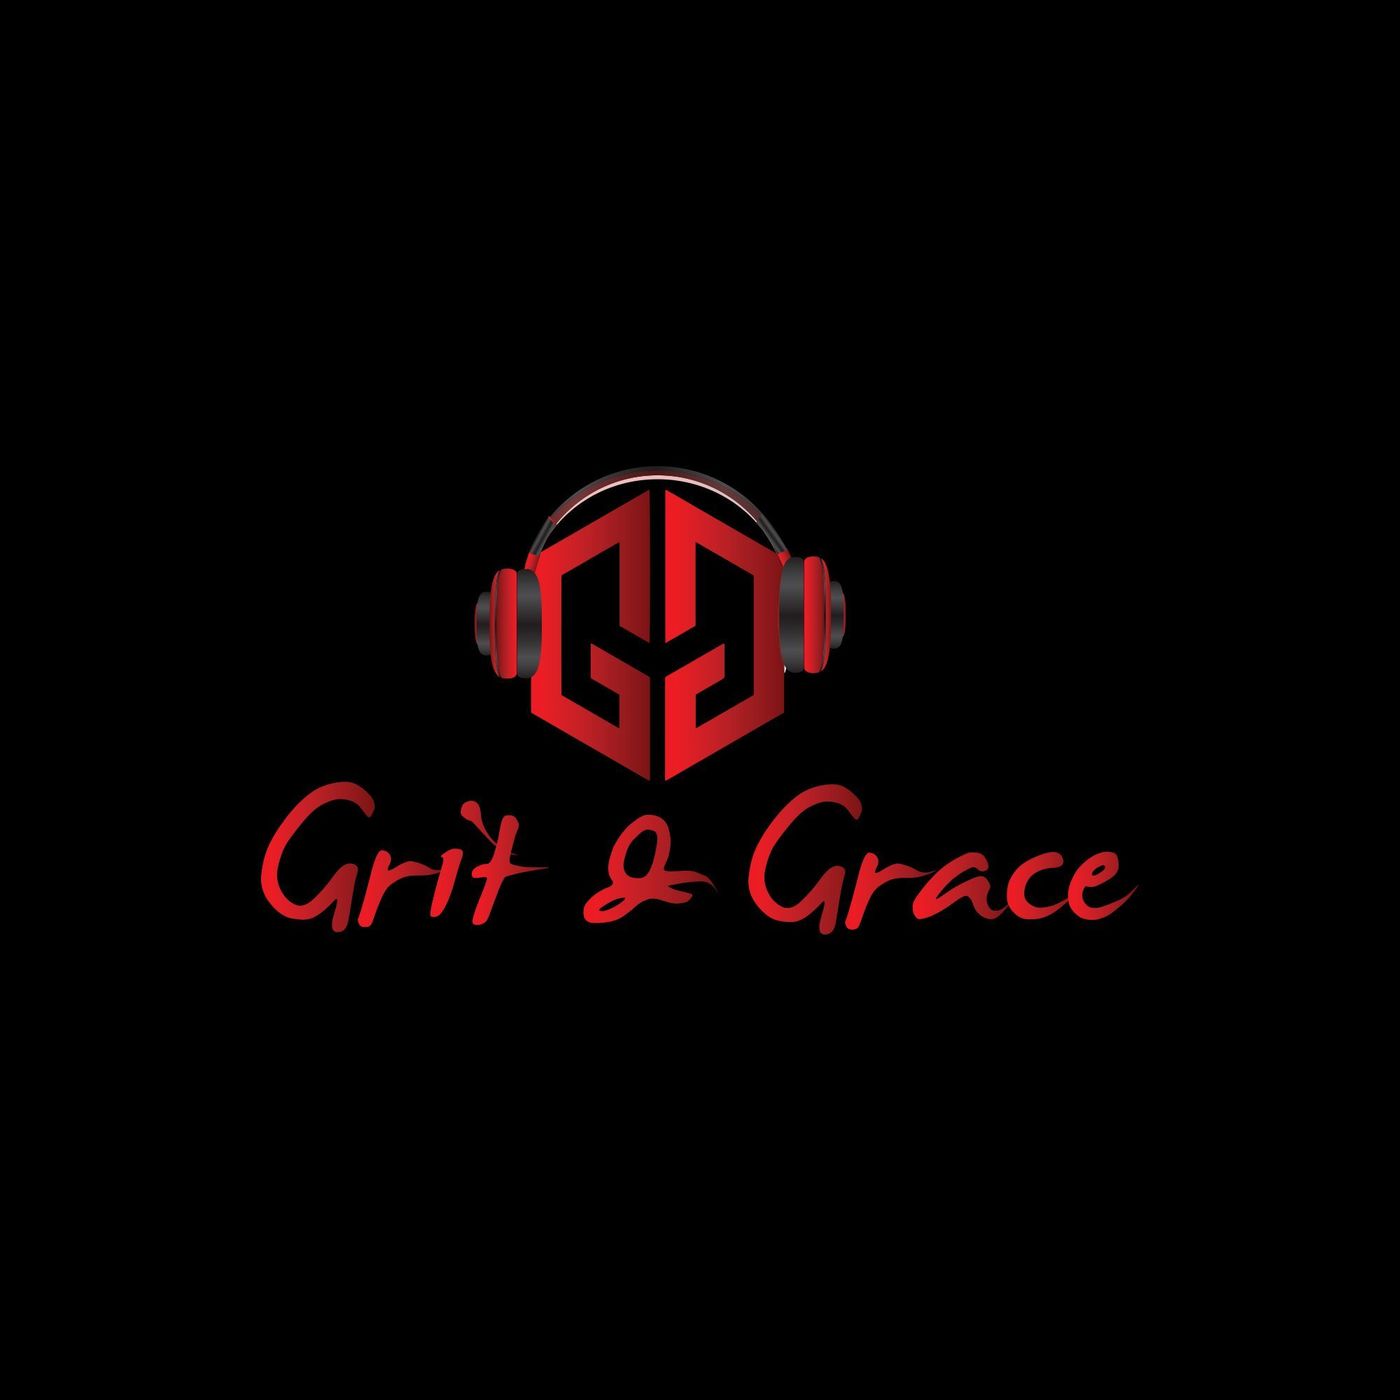 Grit and Grace: The Risk Free Life is a Reward Free Life Image